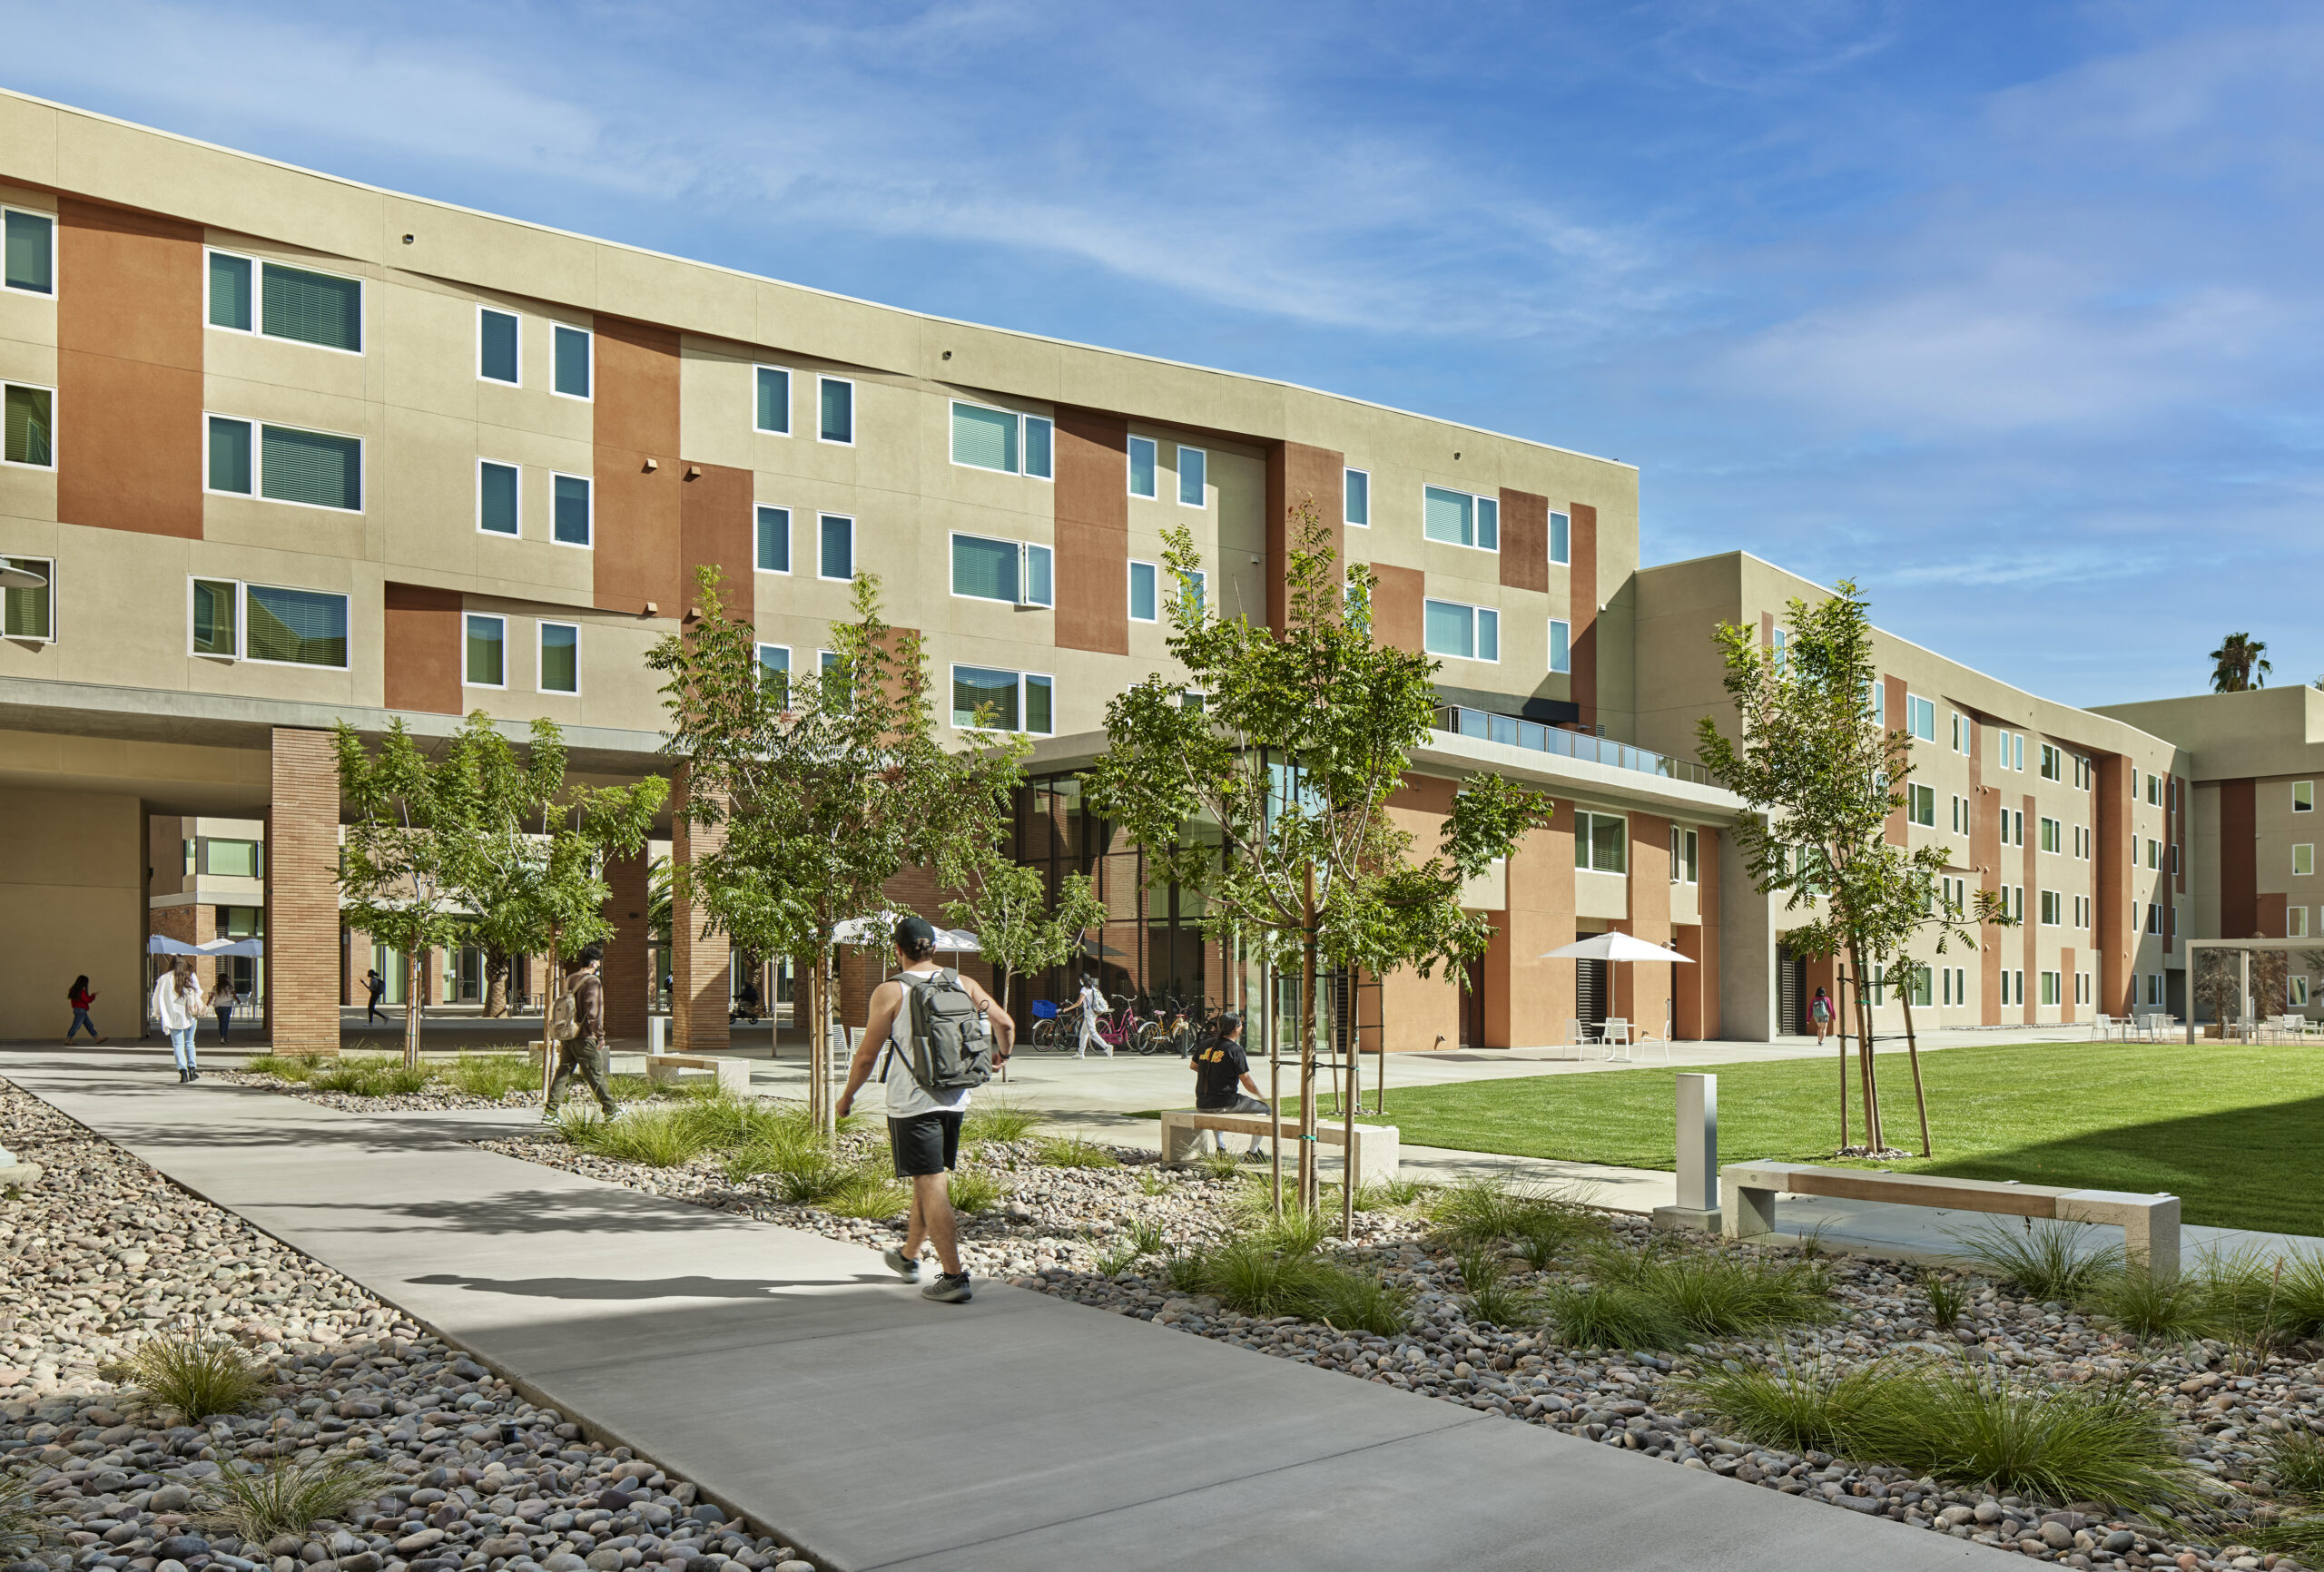 Courtyard at SCB's North District. Architecture. Campus Environments. Campus Life. Student Residential.